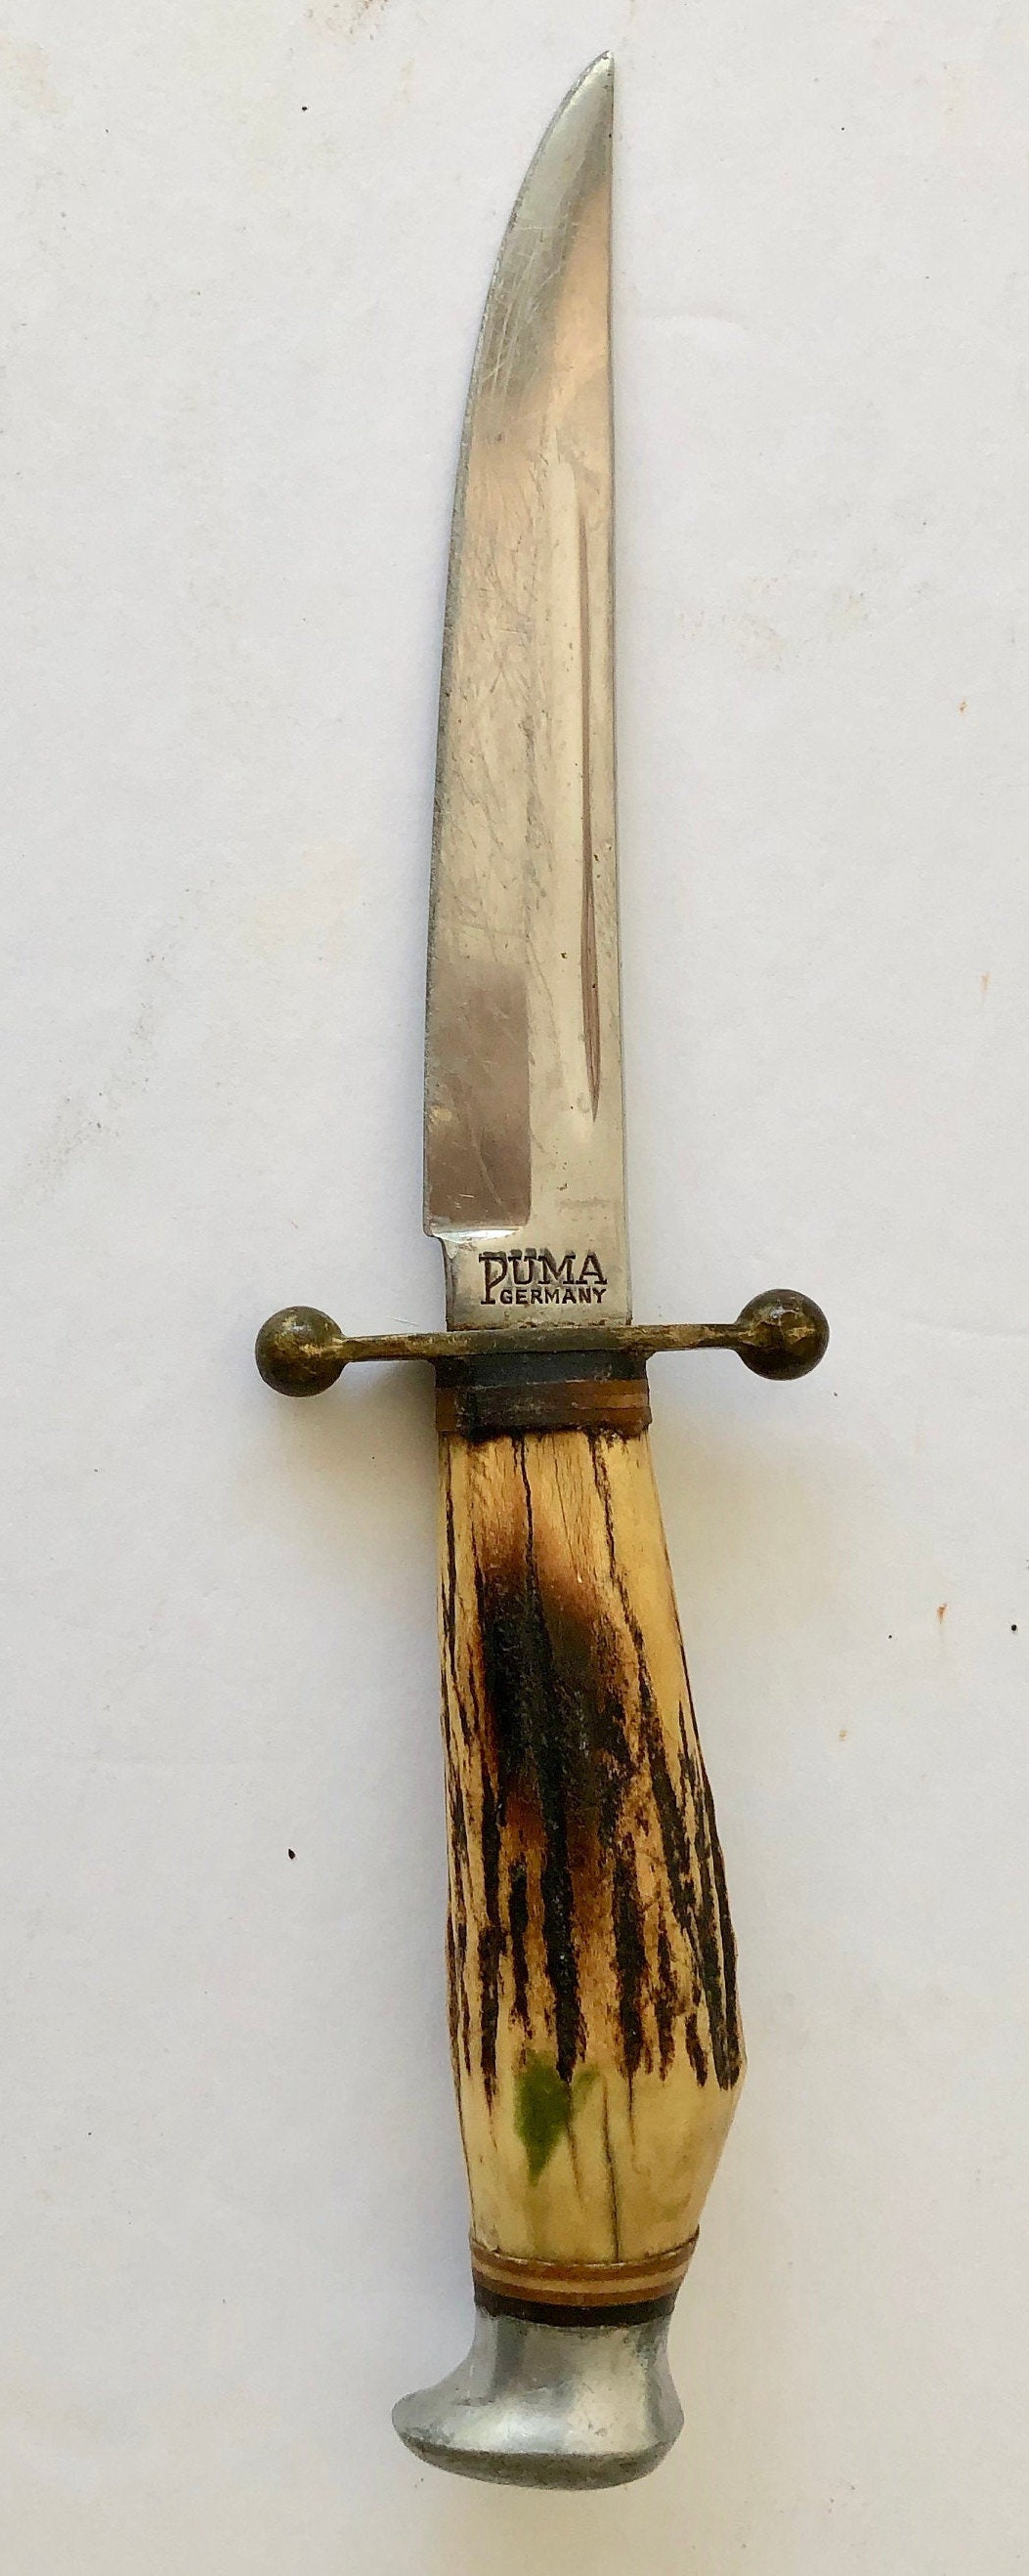 PUMA Knives for sale - High quality knives made in Germany